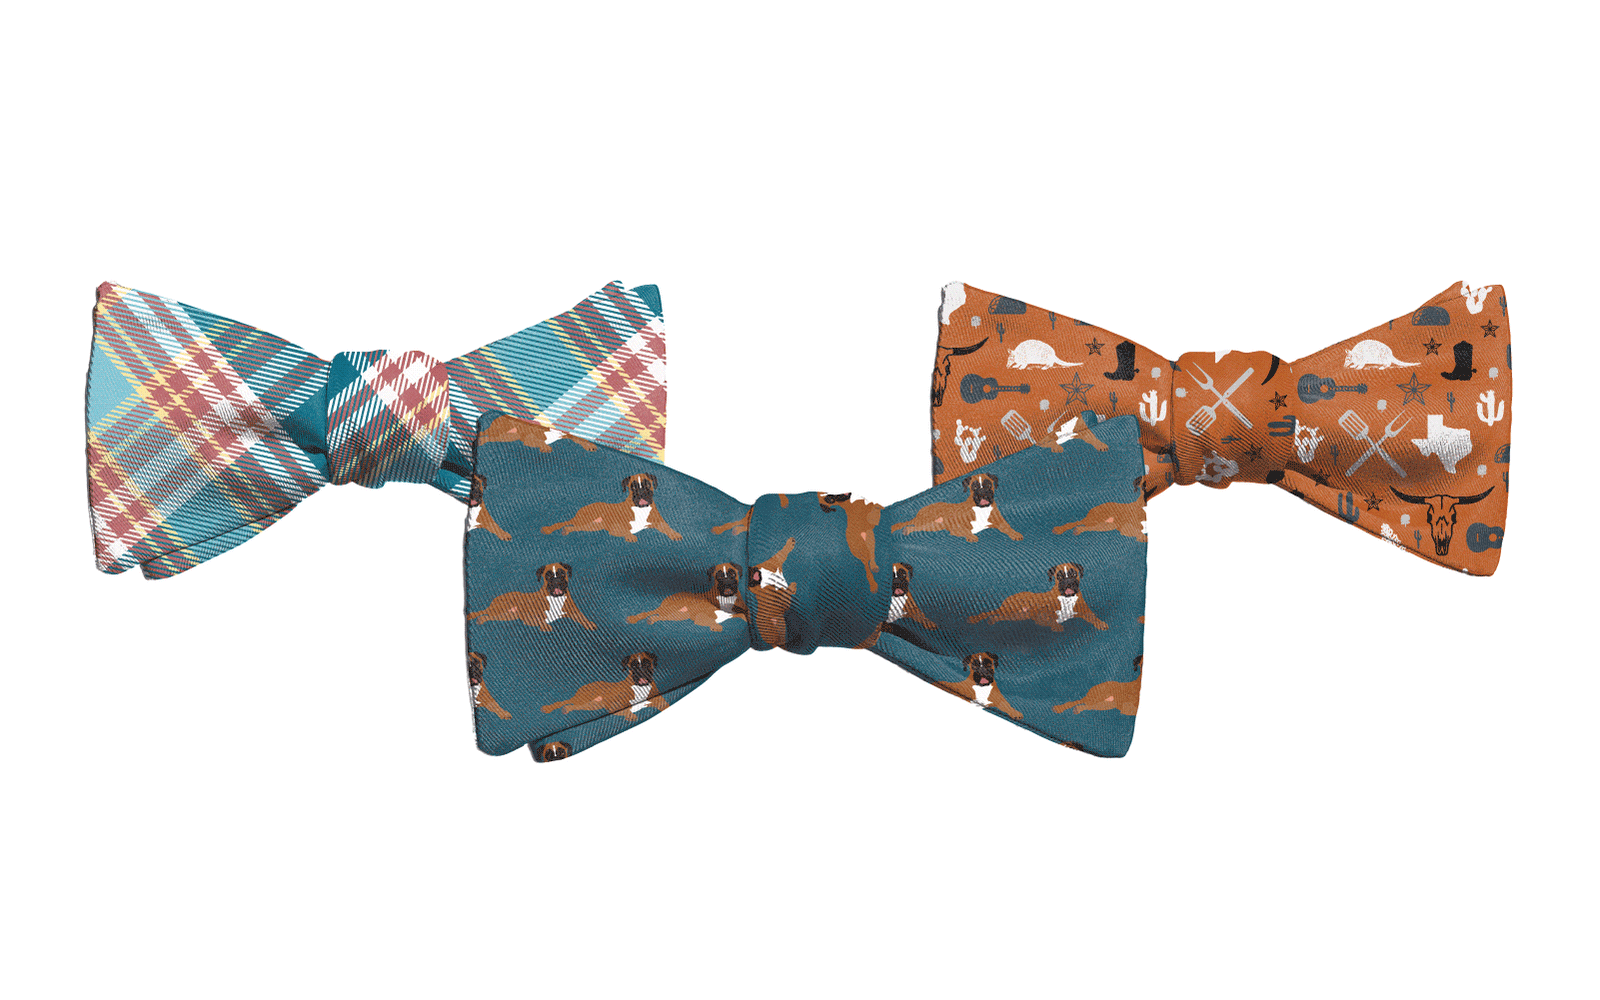 How To Tie A Bow Tie Gif carol penelope